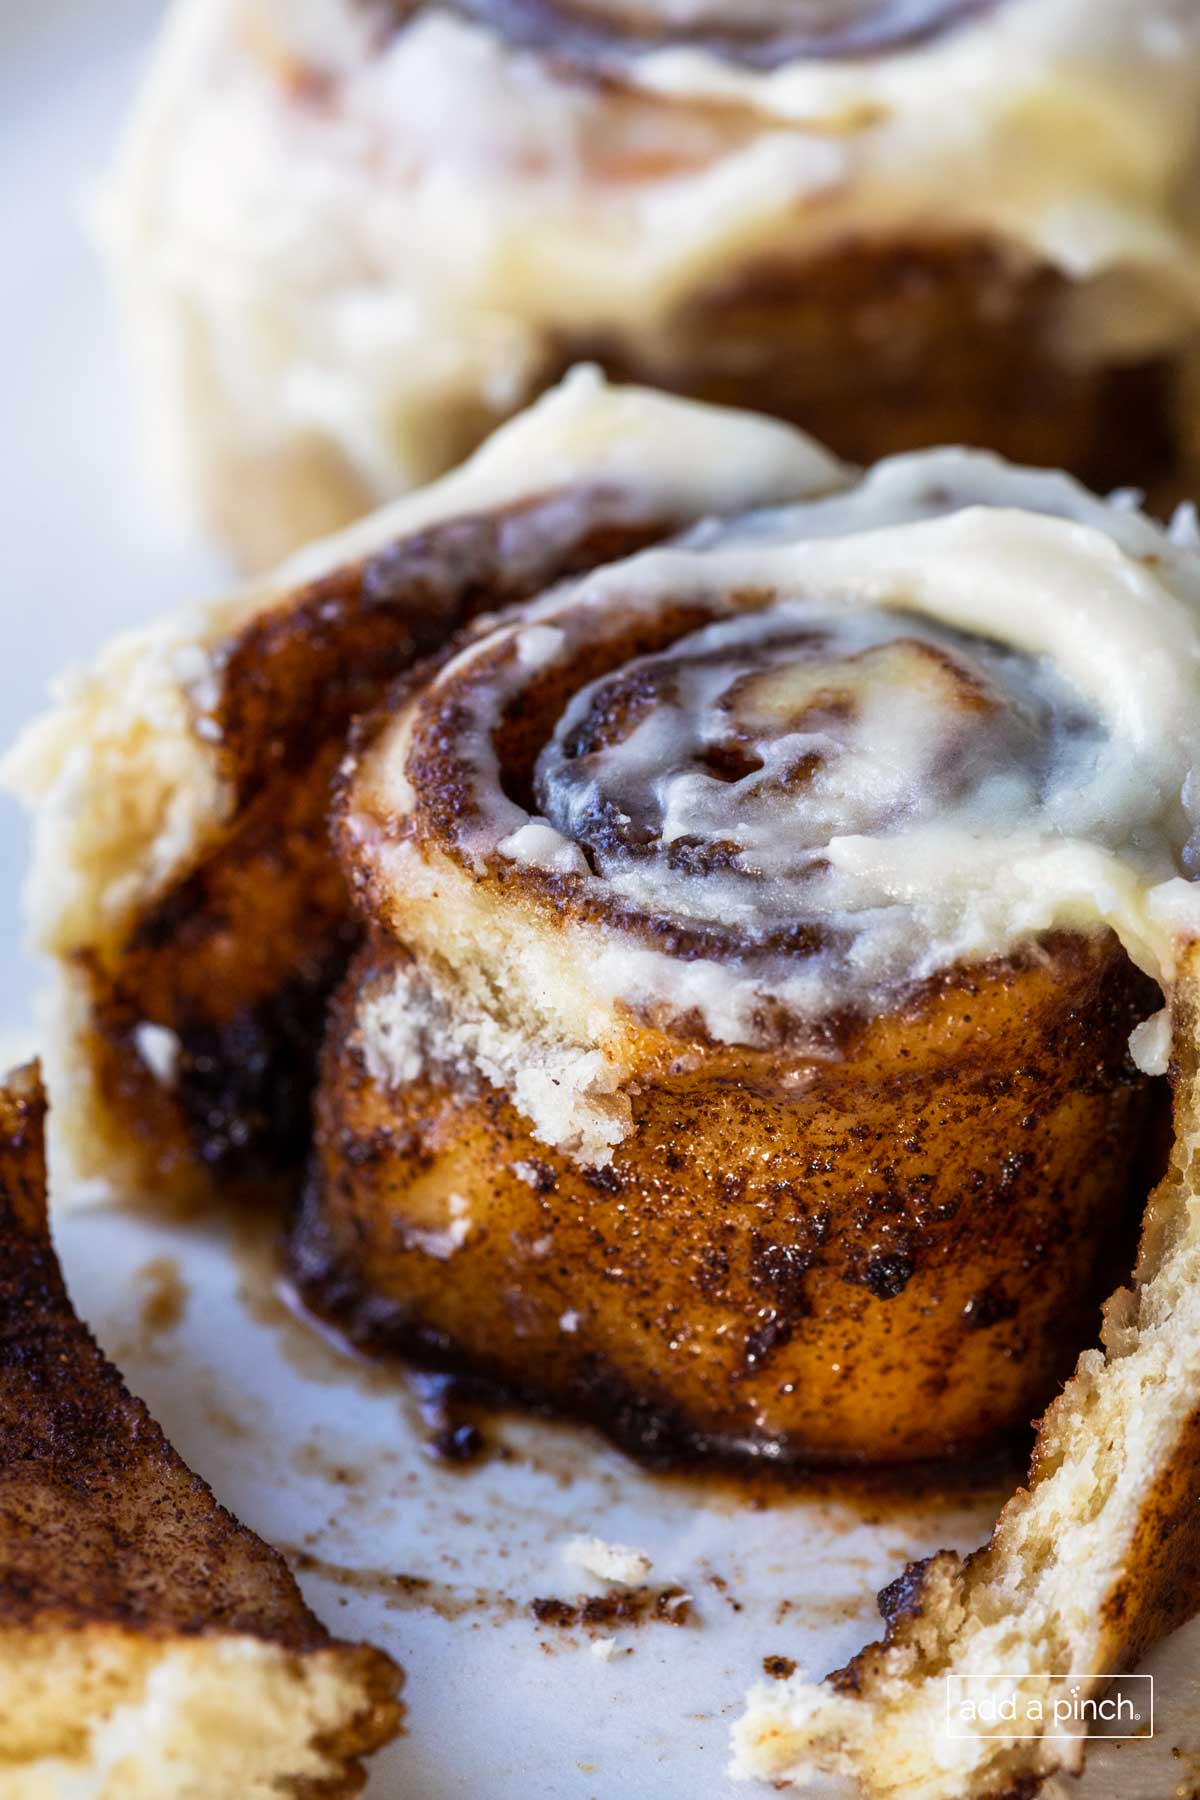 Closeup photo of freshly baked and frosted cinnamon roll with cinnamon filling that's been pulled apart slightly to show the inside. 